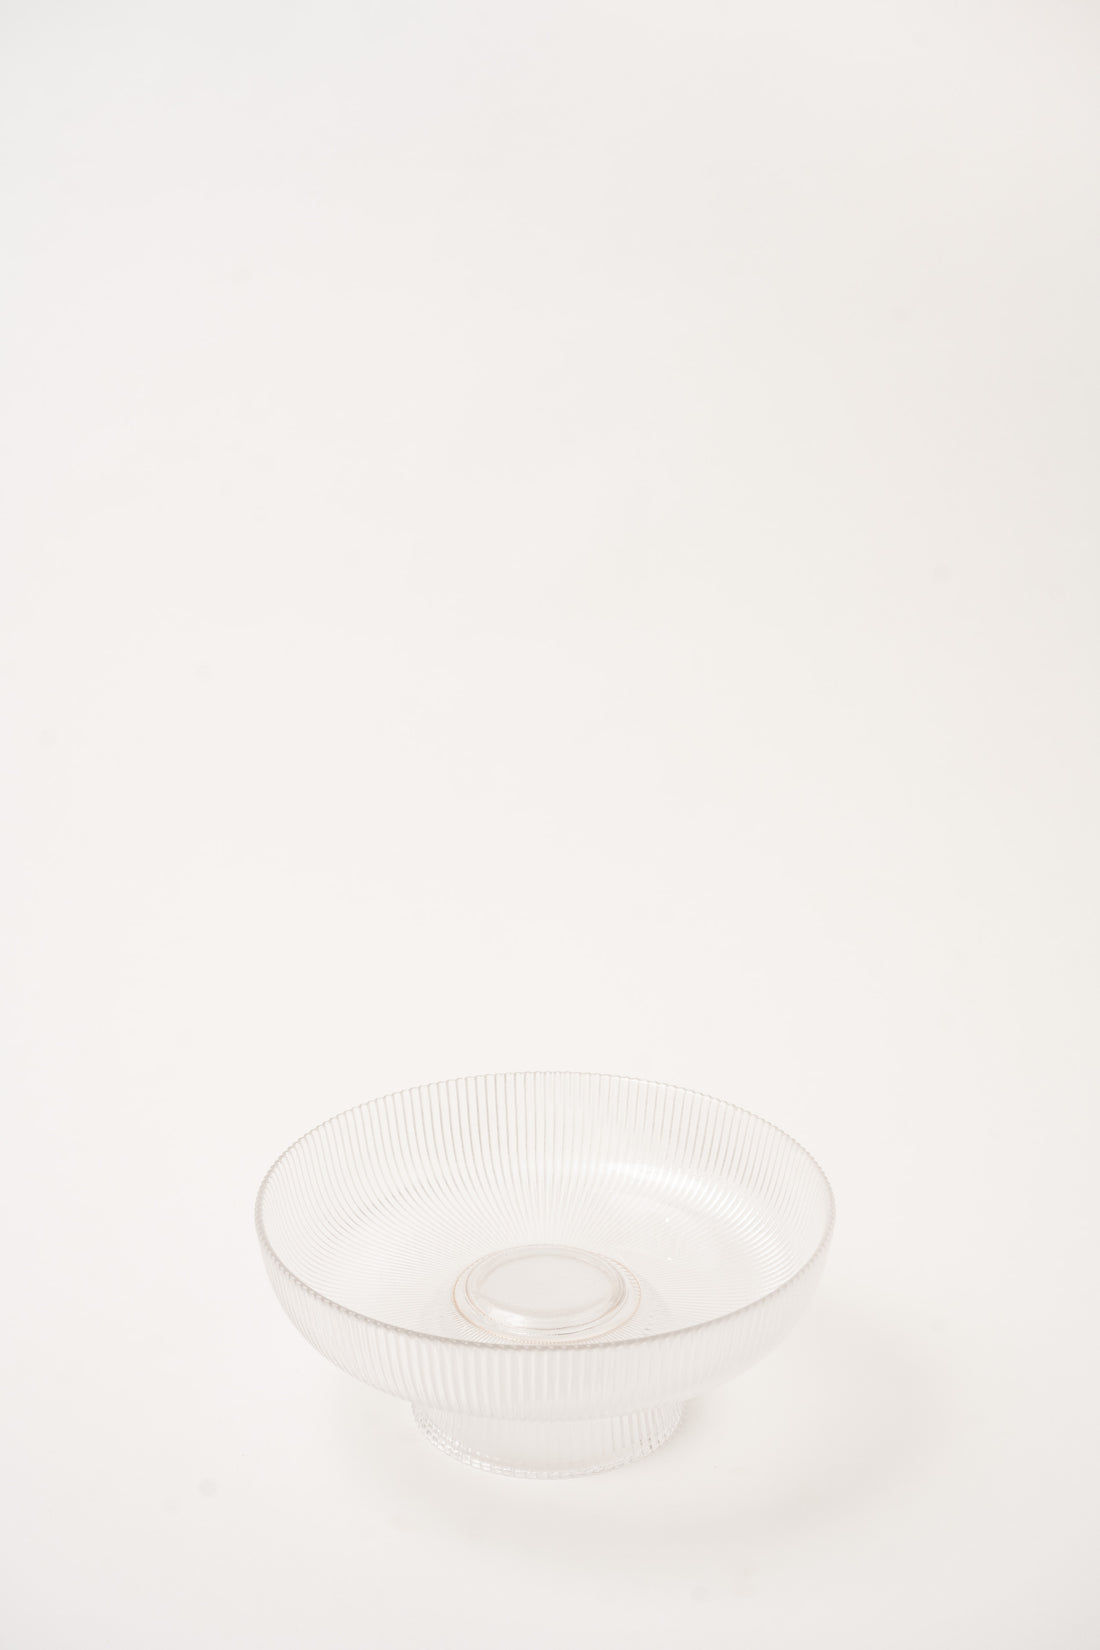 Ribbed Serving Bowl - Clear